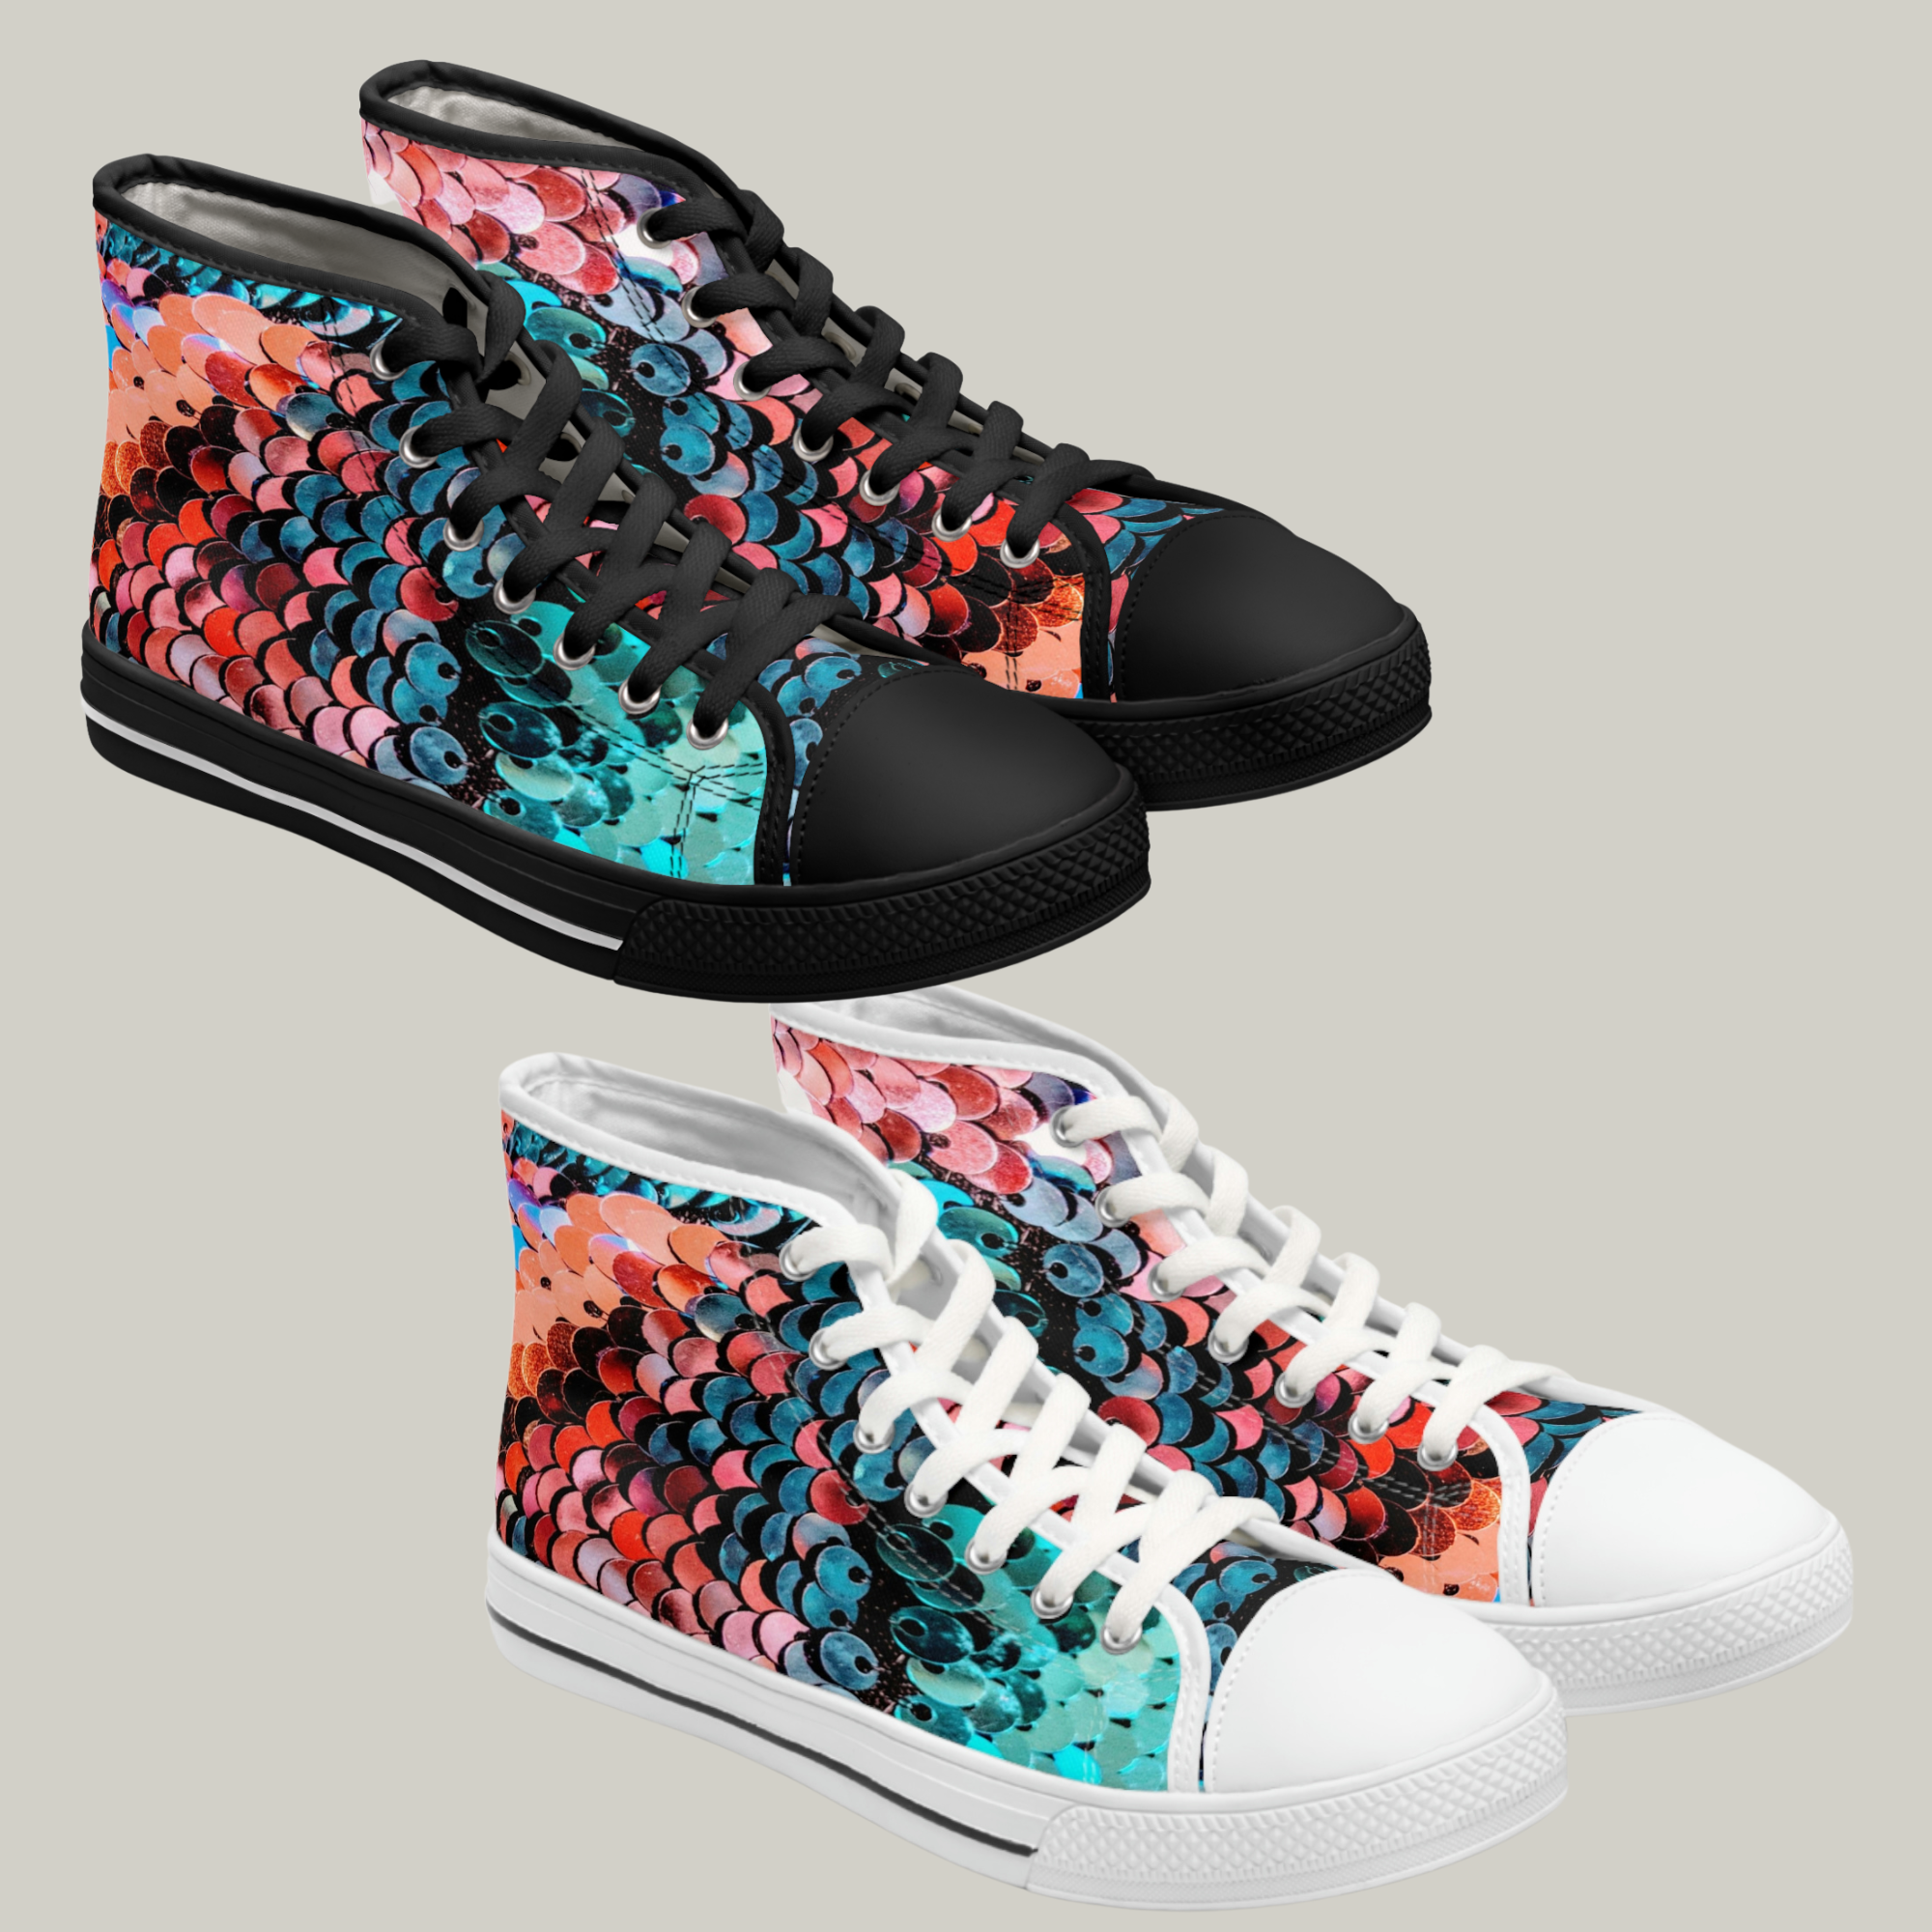 HOT PINK & ELECTRIC BLUE FLIP SEQUIN PRINT - Women's High Top Sneakers Black and White Soles